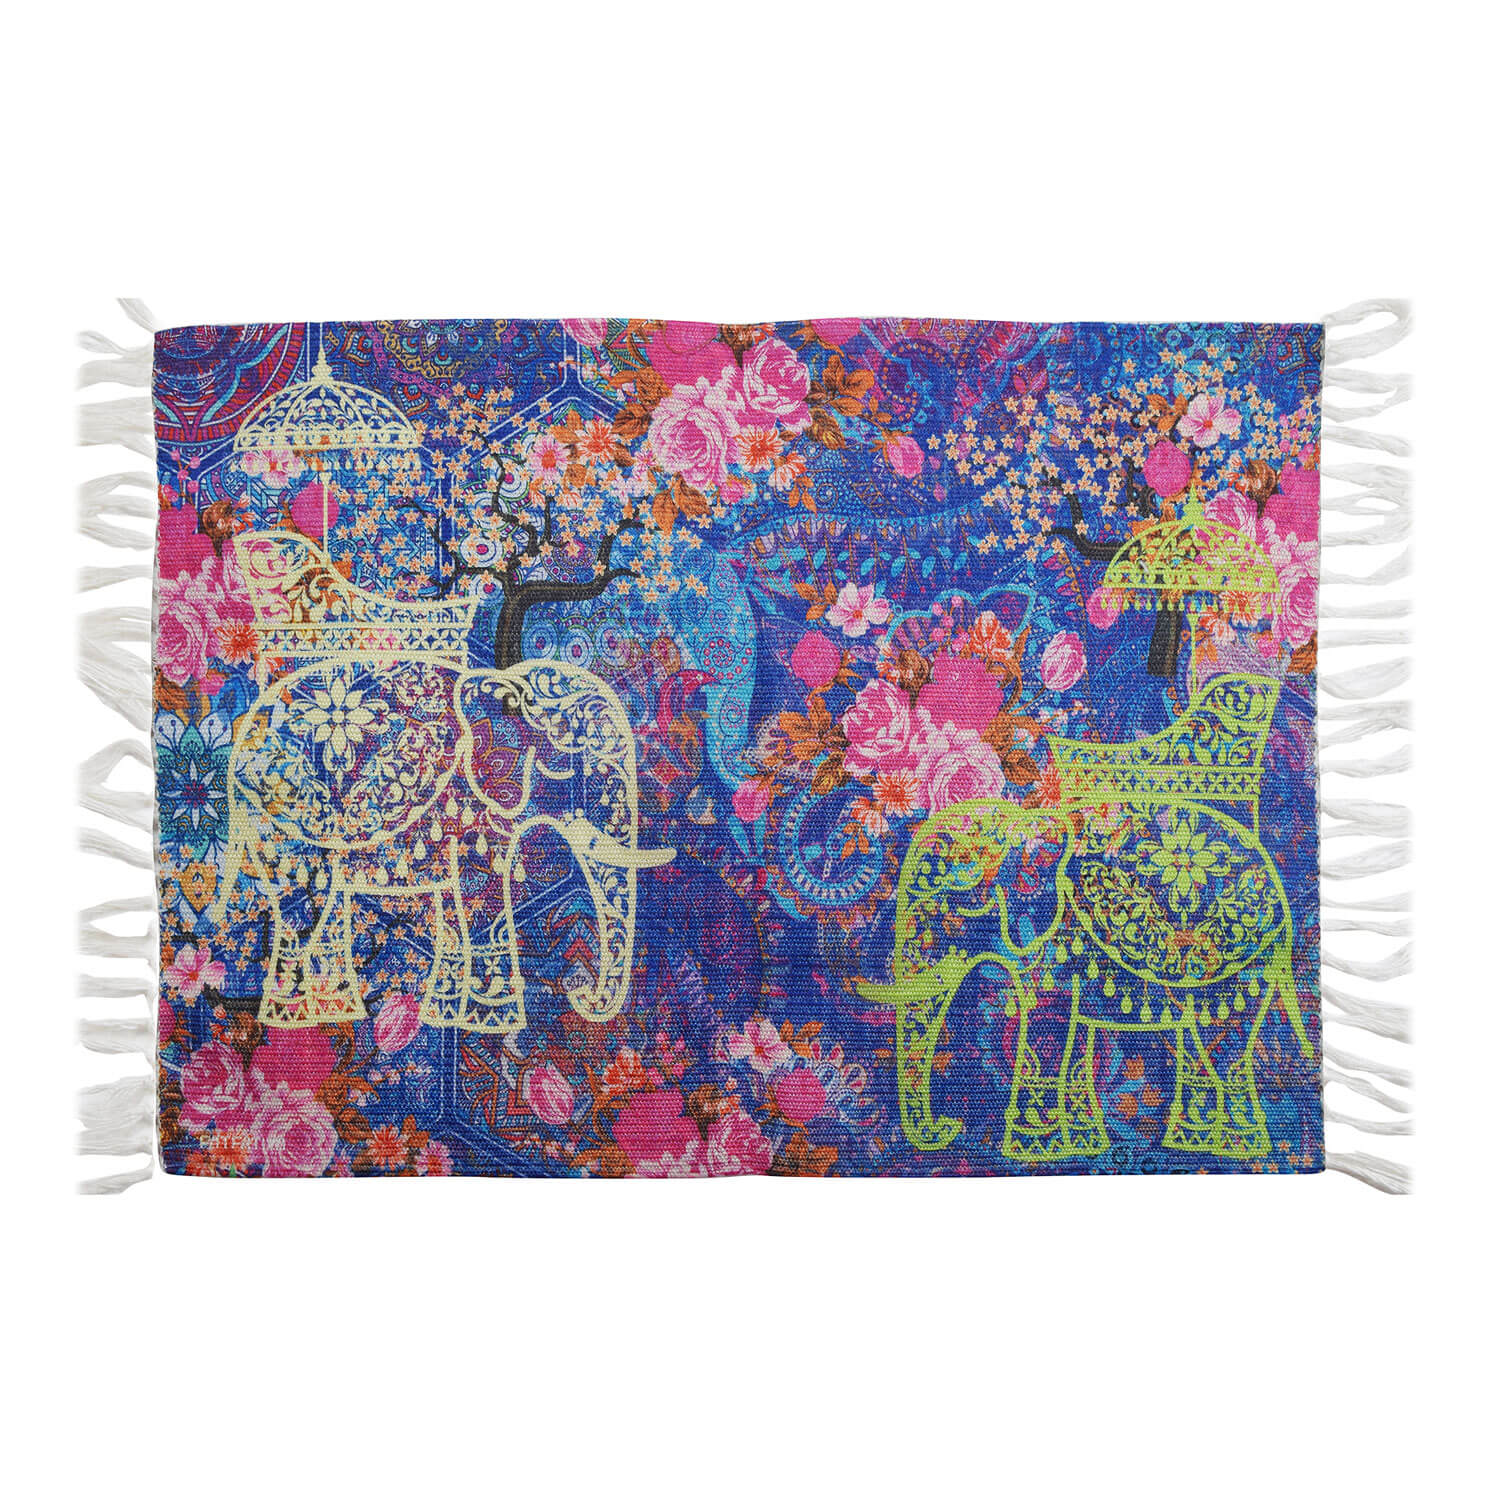 Two Indian Wedding Elephant Re-Cycled Polyester Rug